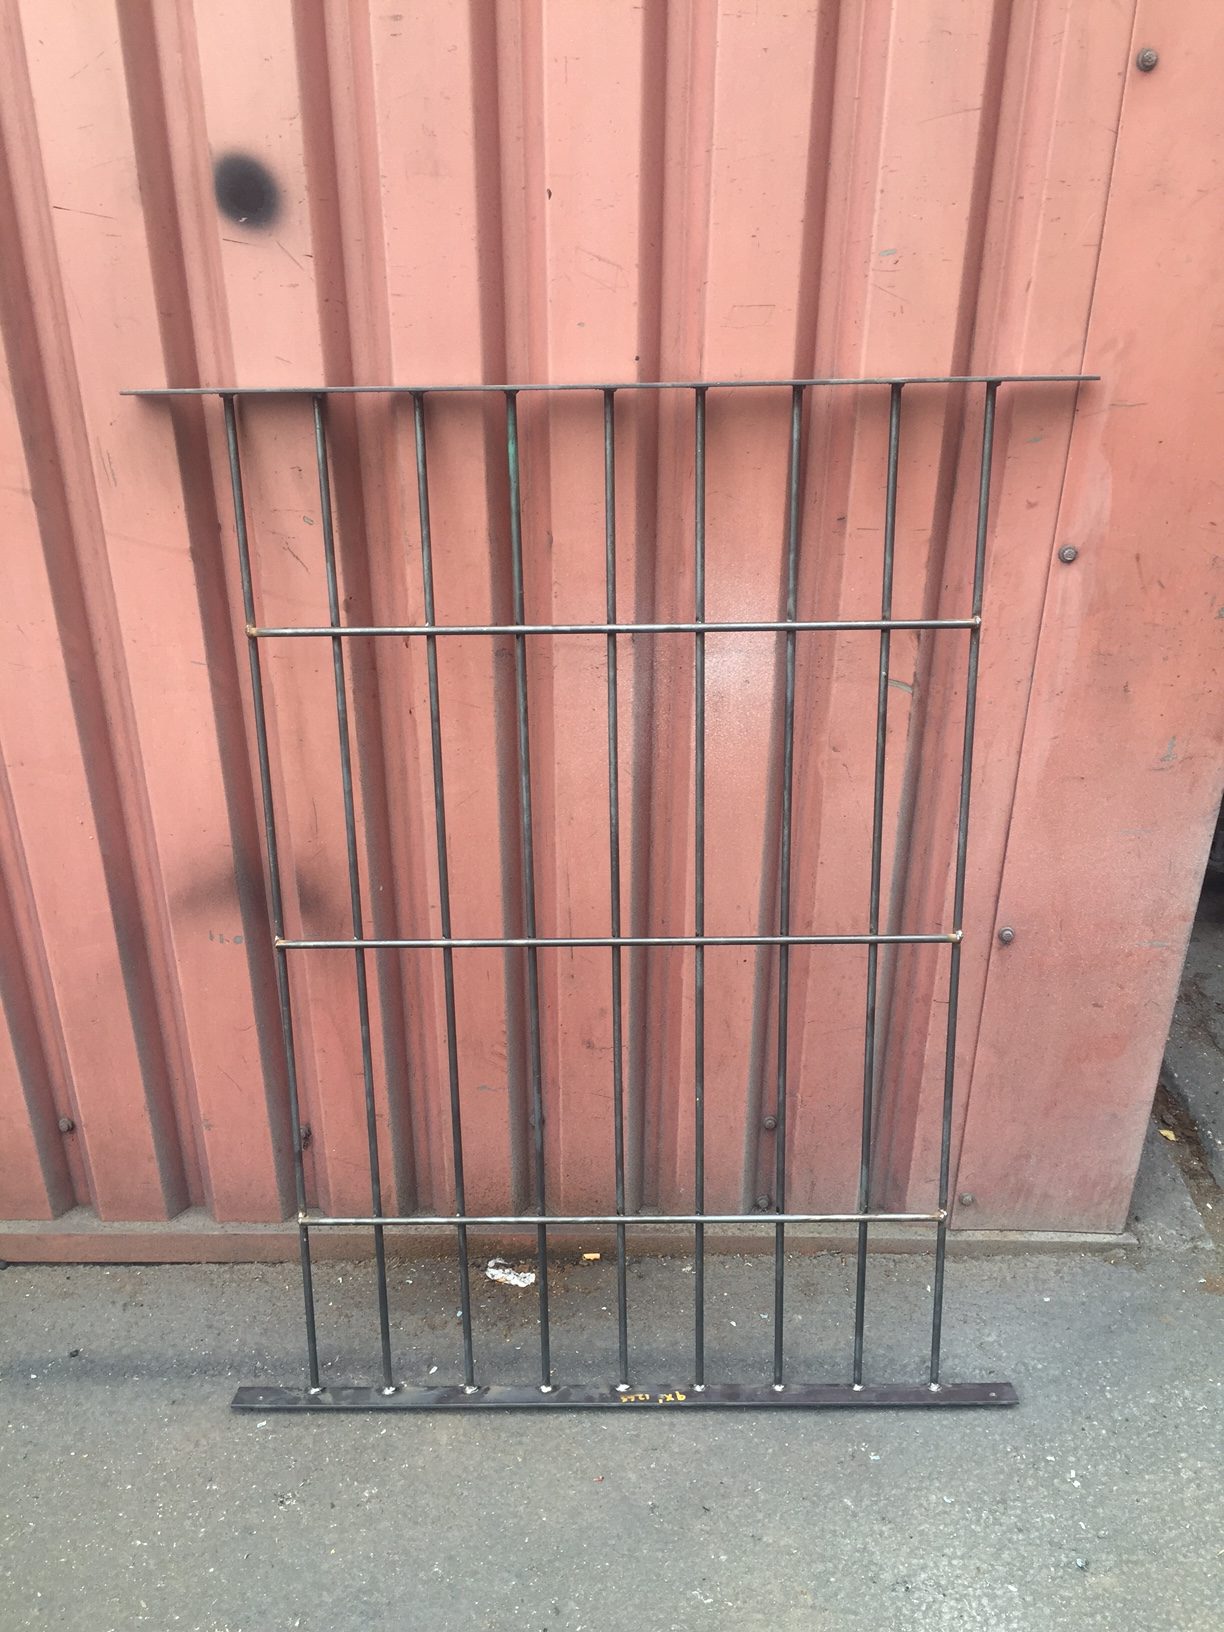 SECURITY Window Grill Bars Large